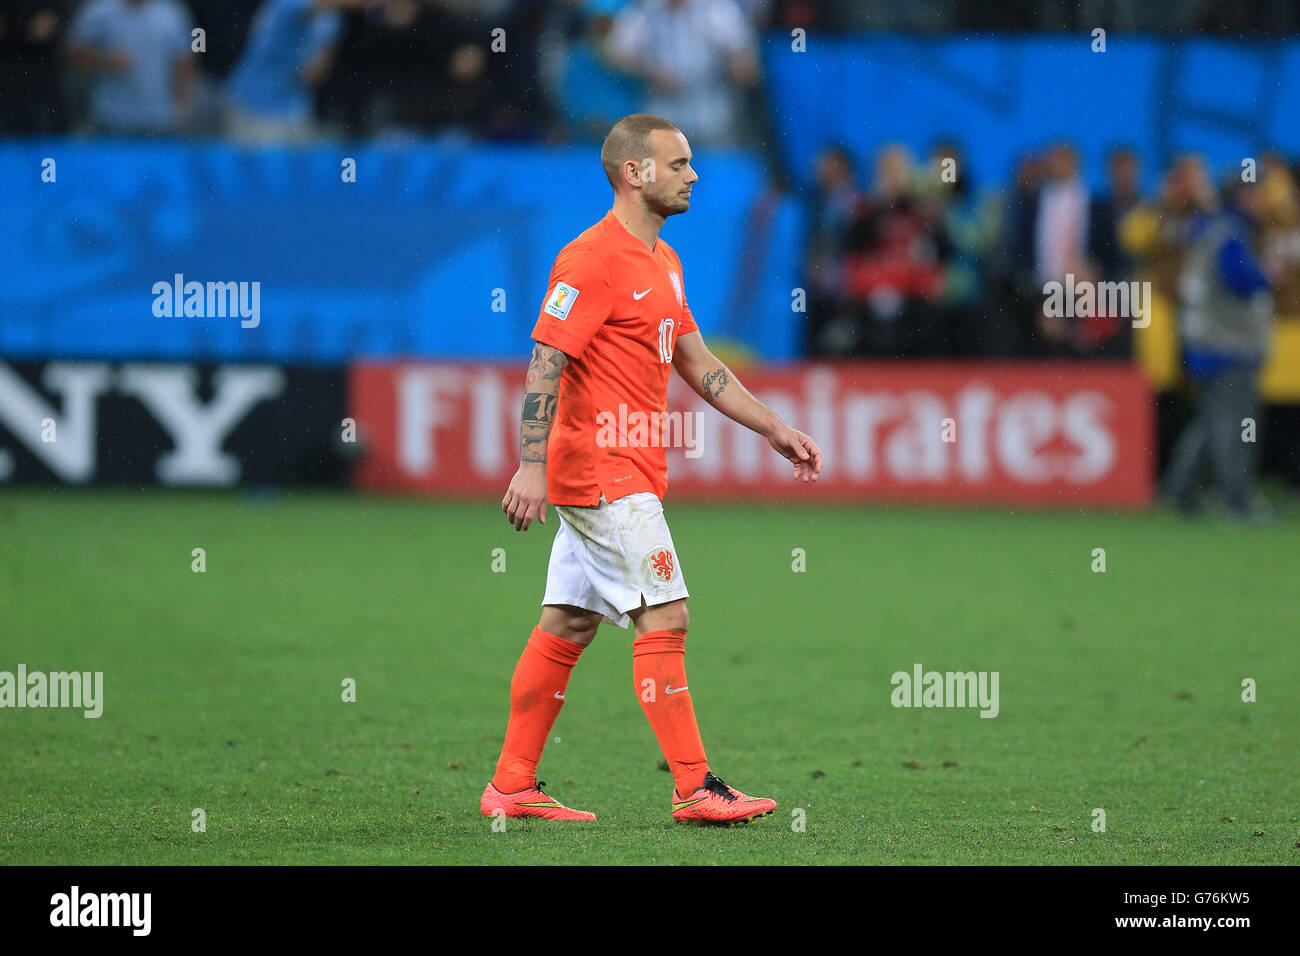 Netherlands' Wesley Sneijder is left dejected after missing a penalty in the shoot-out during the FIFA World Cup Semi Final at the Arena de Sao Paulo, Sao Paulo, Brazil. PRESS ASSOCIATION Photo. Picture date: Wednesday July 9, 2014. See PA story SOCCER Holland. Photo credit should read: Mike Egerton/PA Wire. RESTRICTIONS: . No commercial use. No use with any unofficial 3rd party logos. No manipulation of images. No video emulation Stock Photo